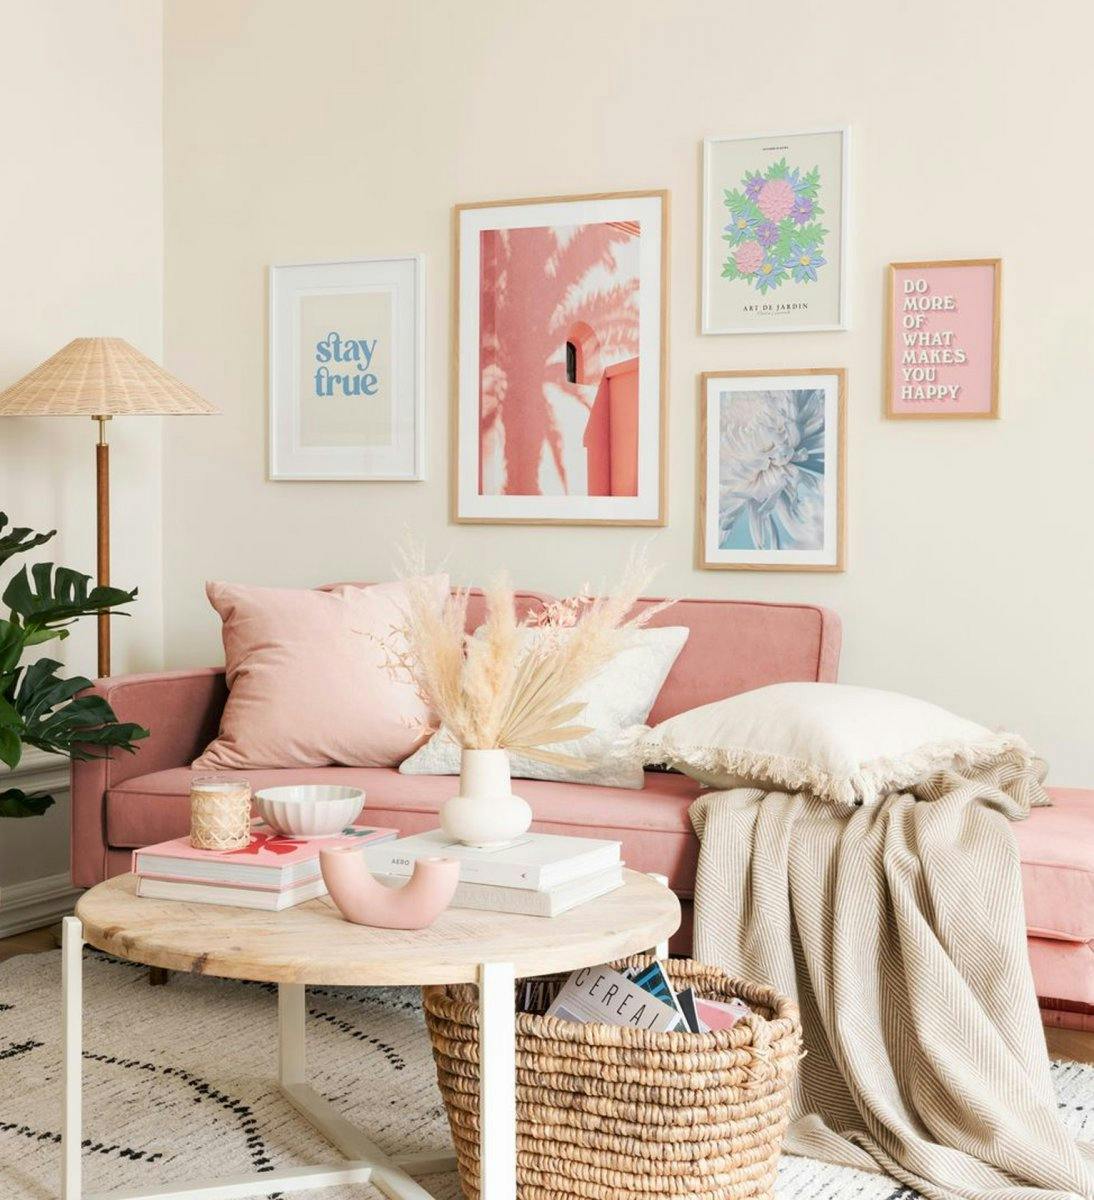 Gallery wall with soft pastels for the joyful living room. Frames in both oak and white wood. 